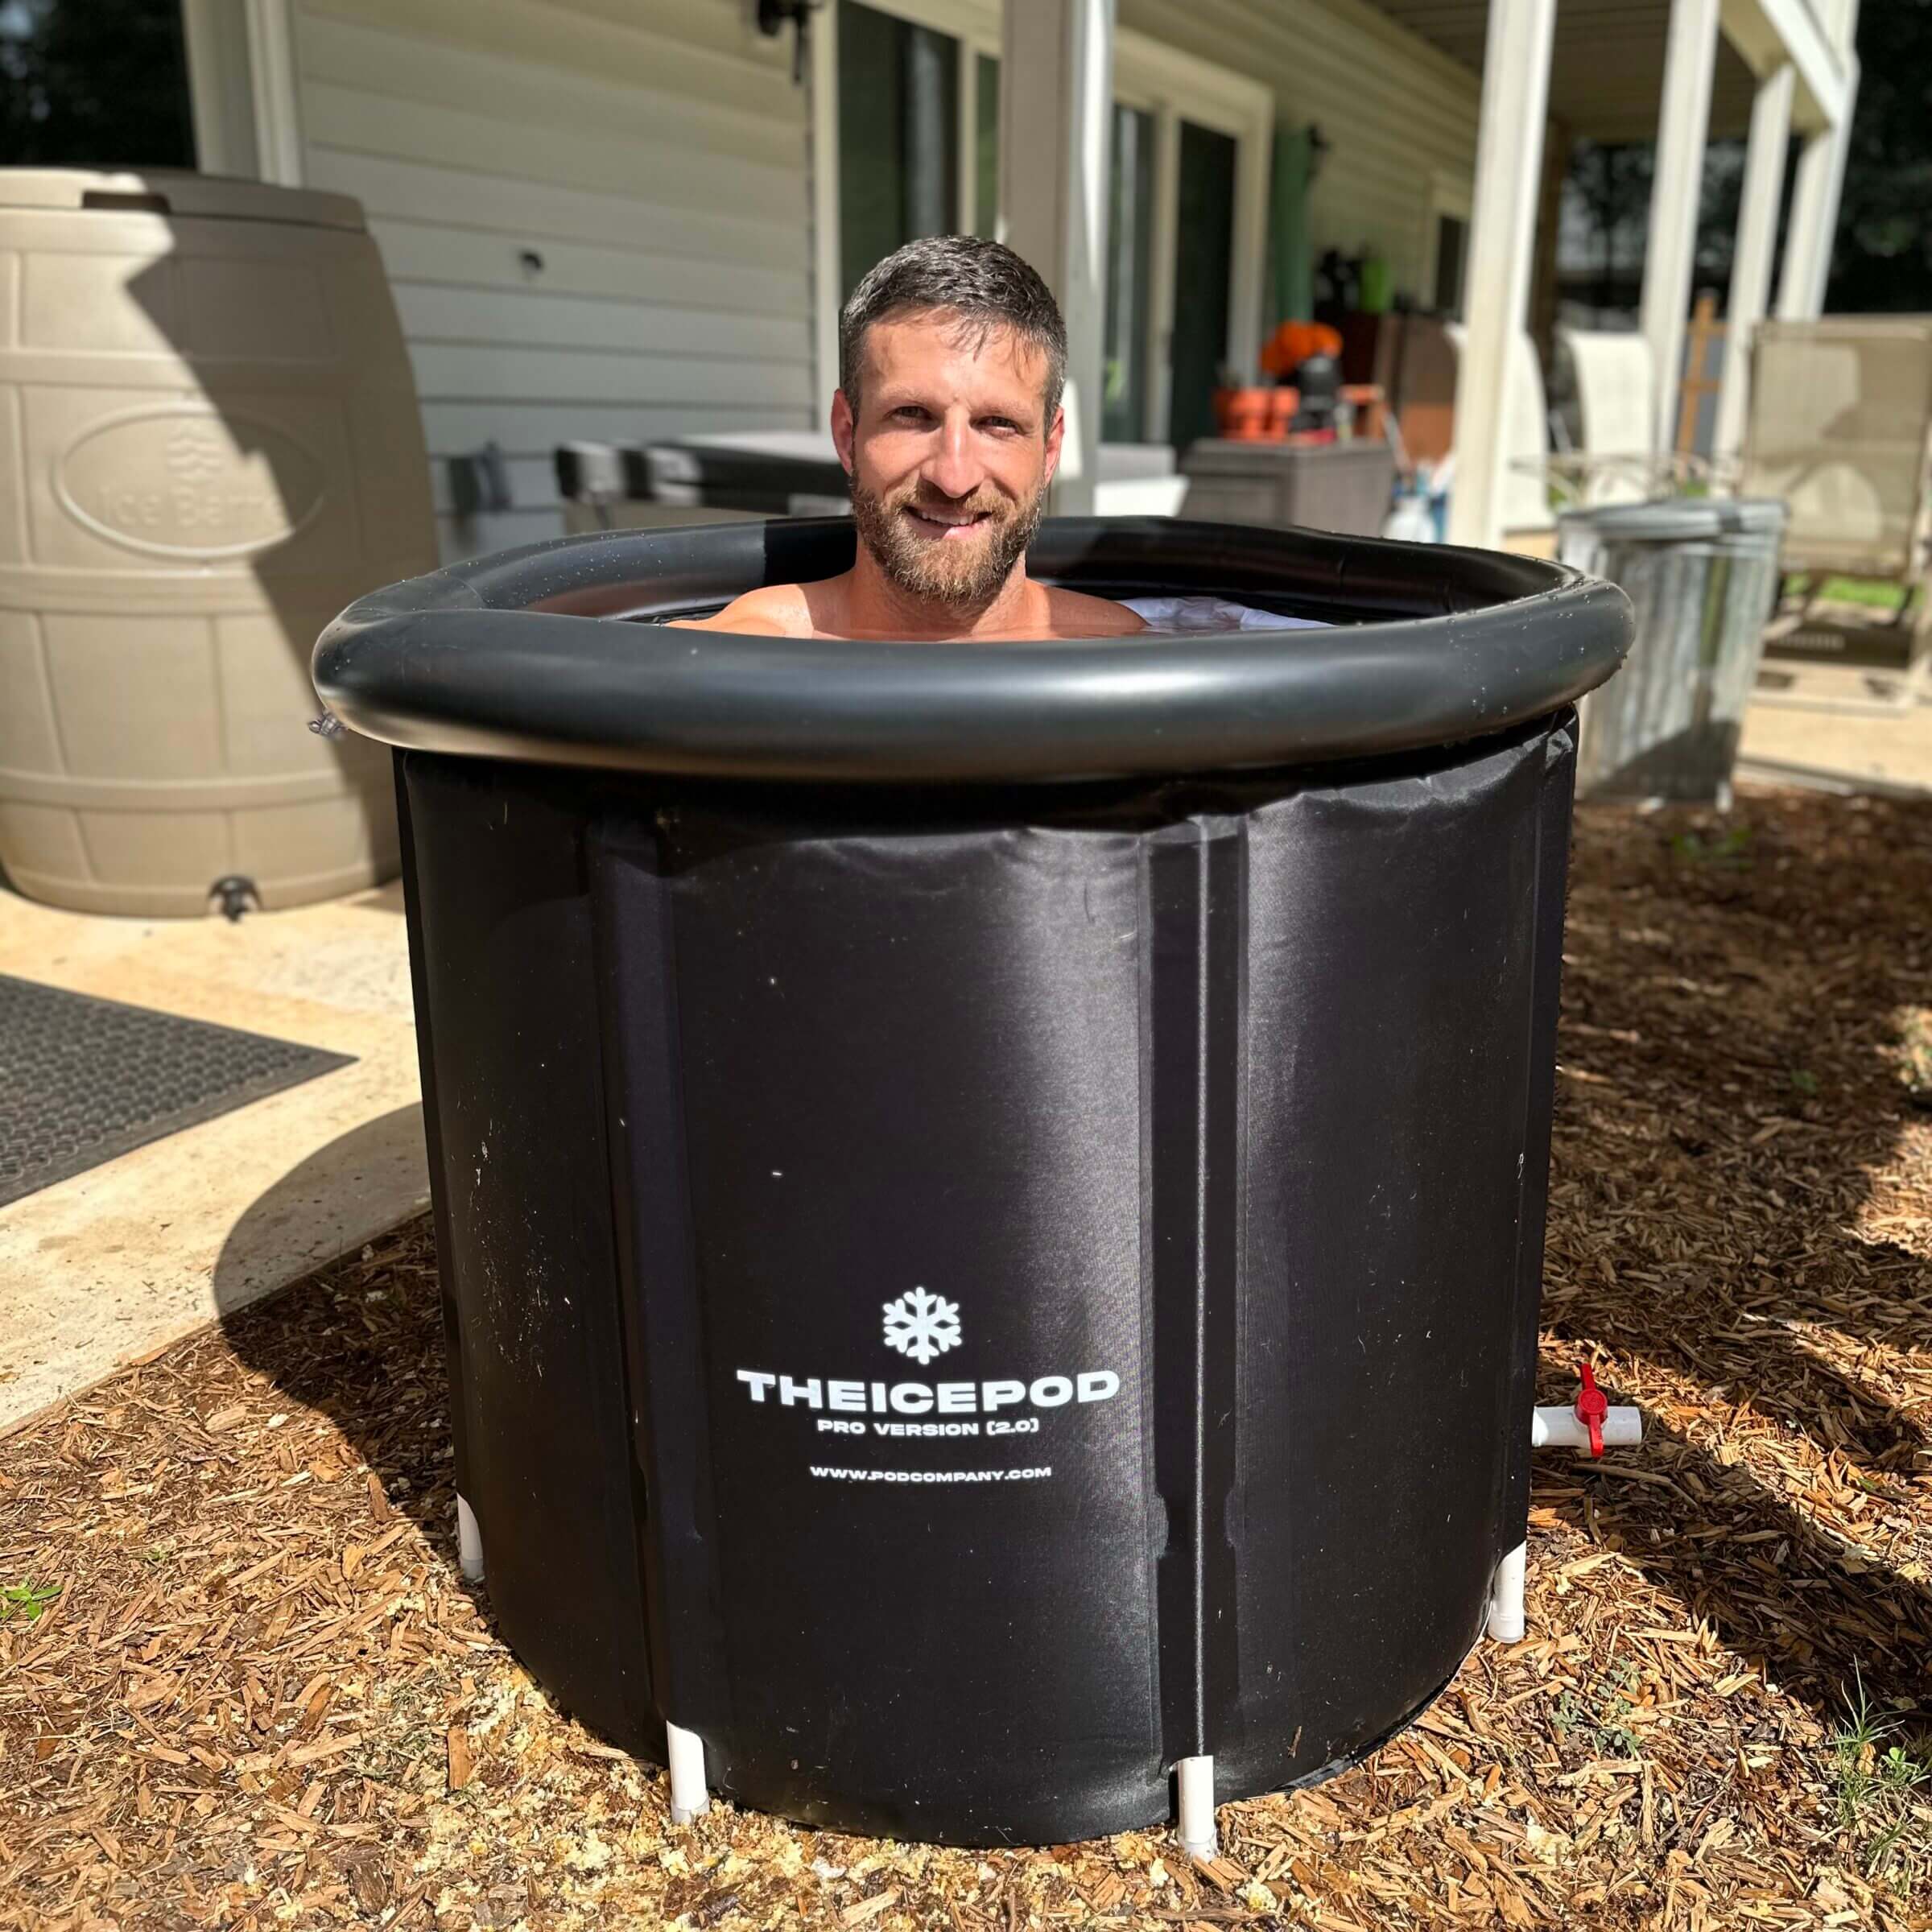 I fit in just fine, though the Ice Pod Pro is less spacious than some of the other tubs I own.